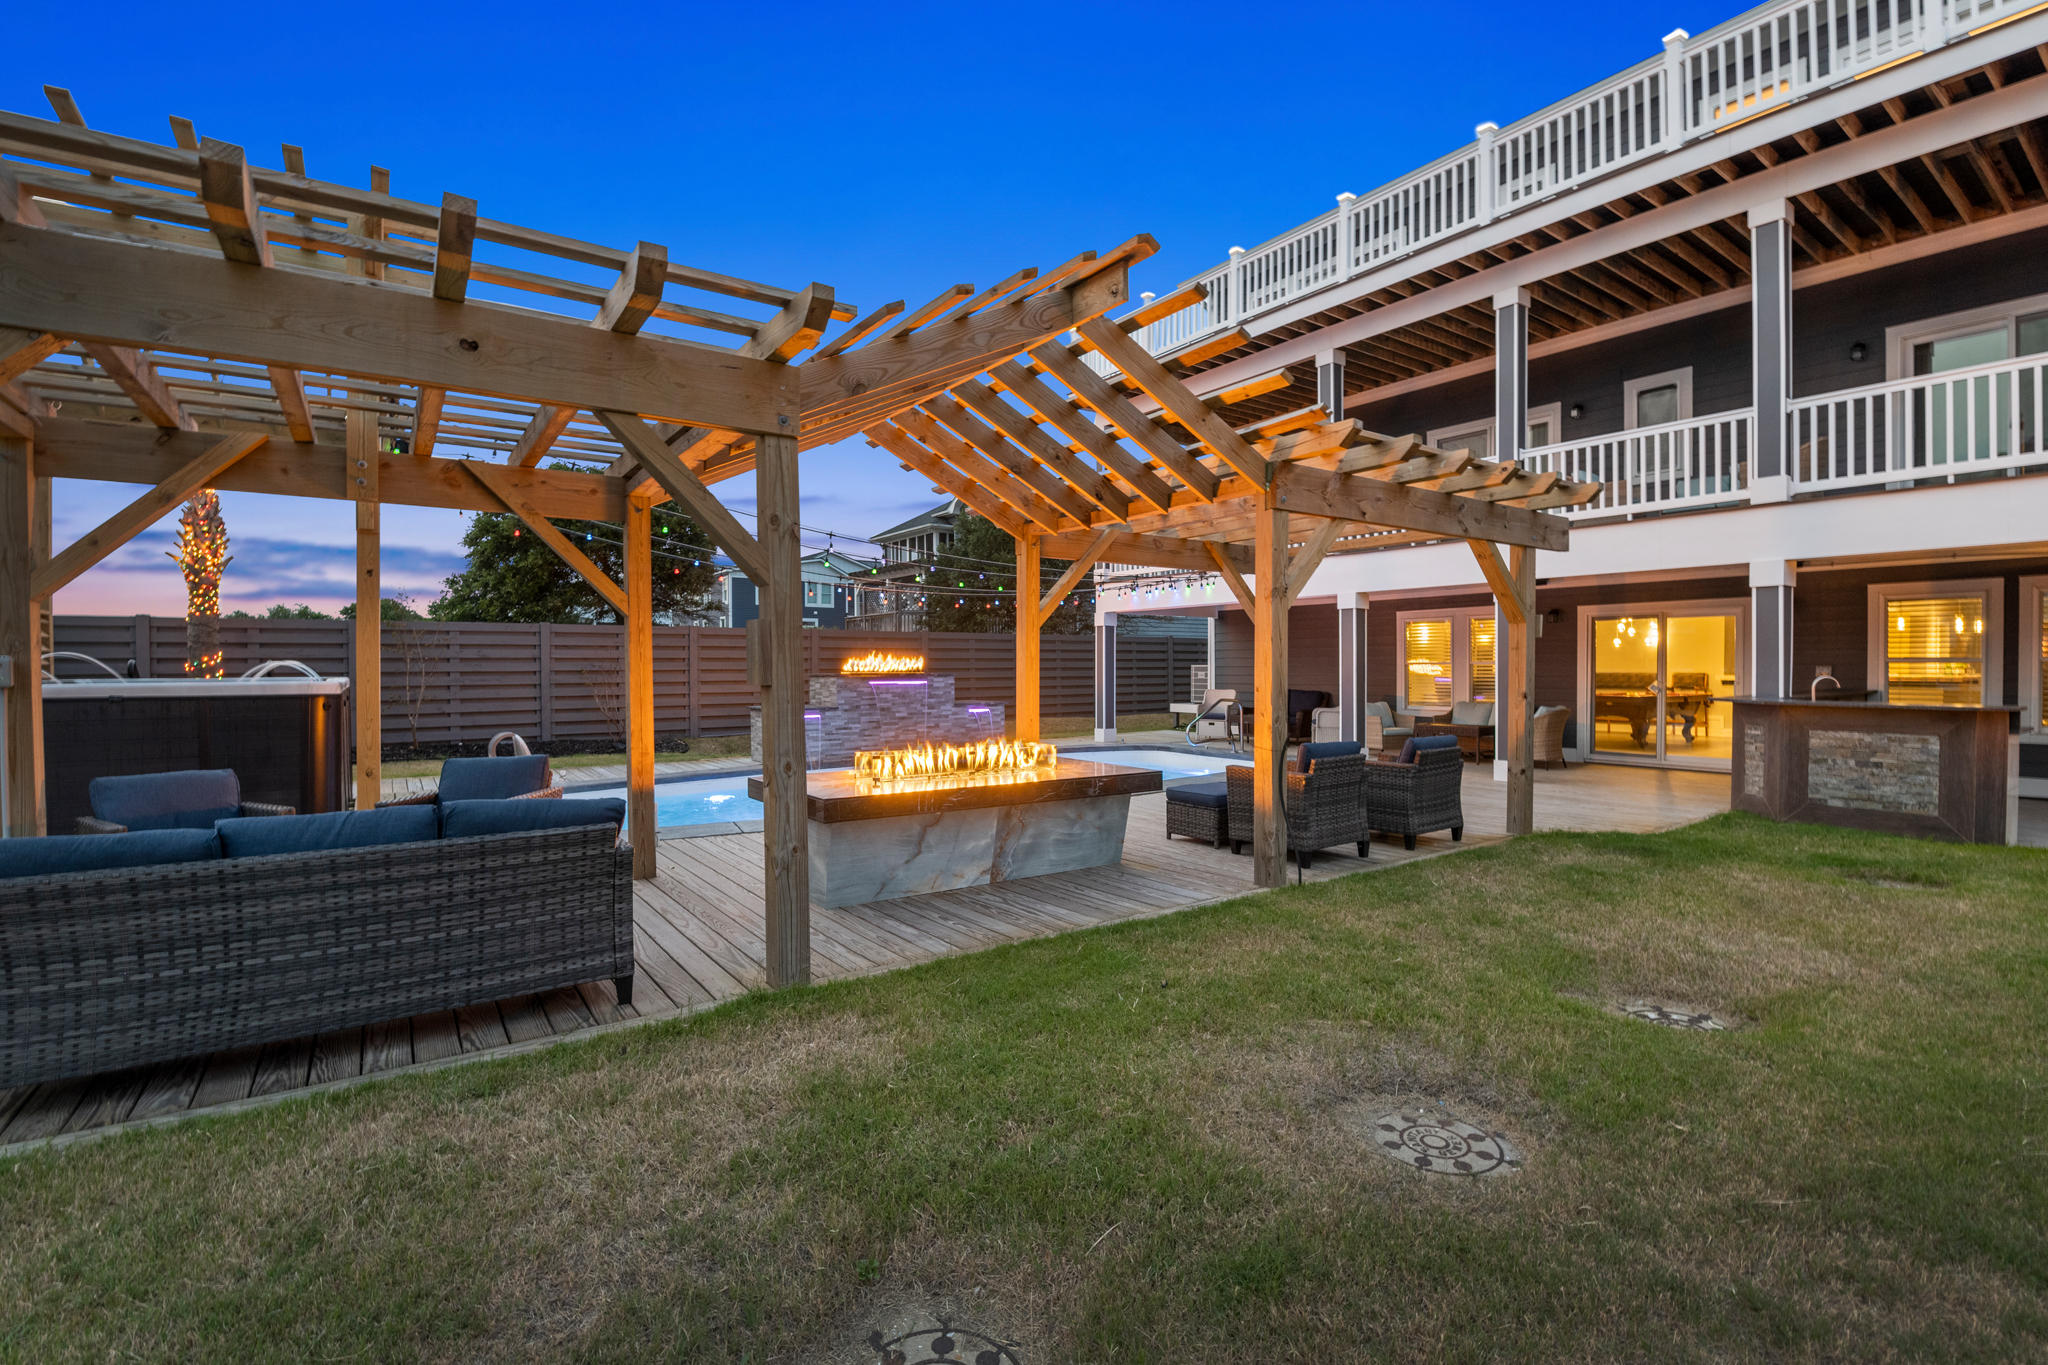 WH786: The OBX One | Fully Enclosed Backyard Event Space